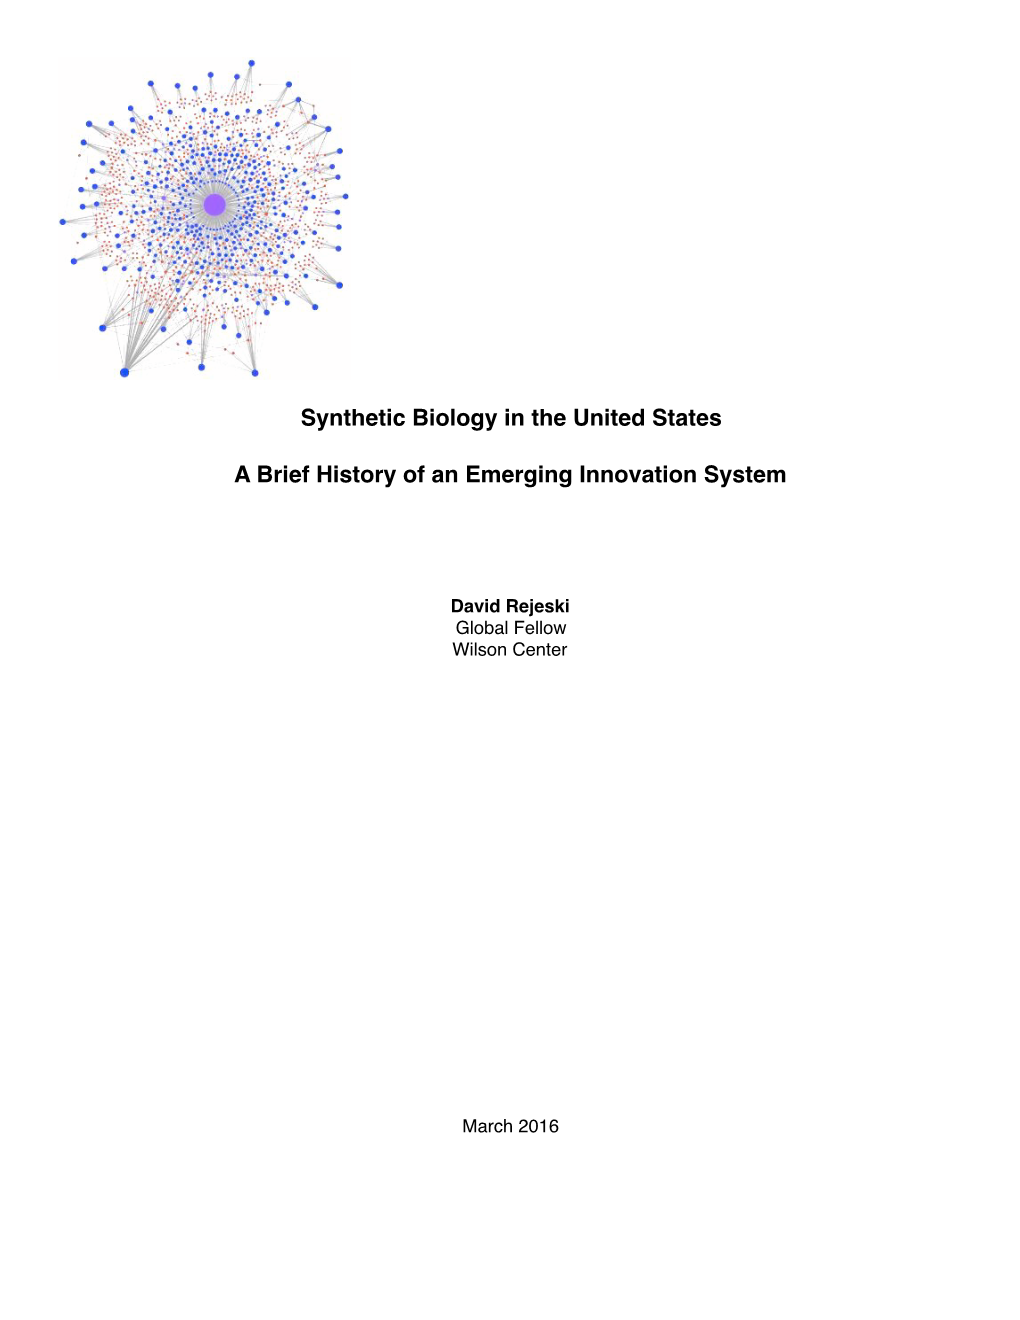 Synthetic Biology in the United States a Brief History of an Emerging Innovation System